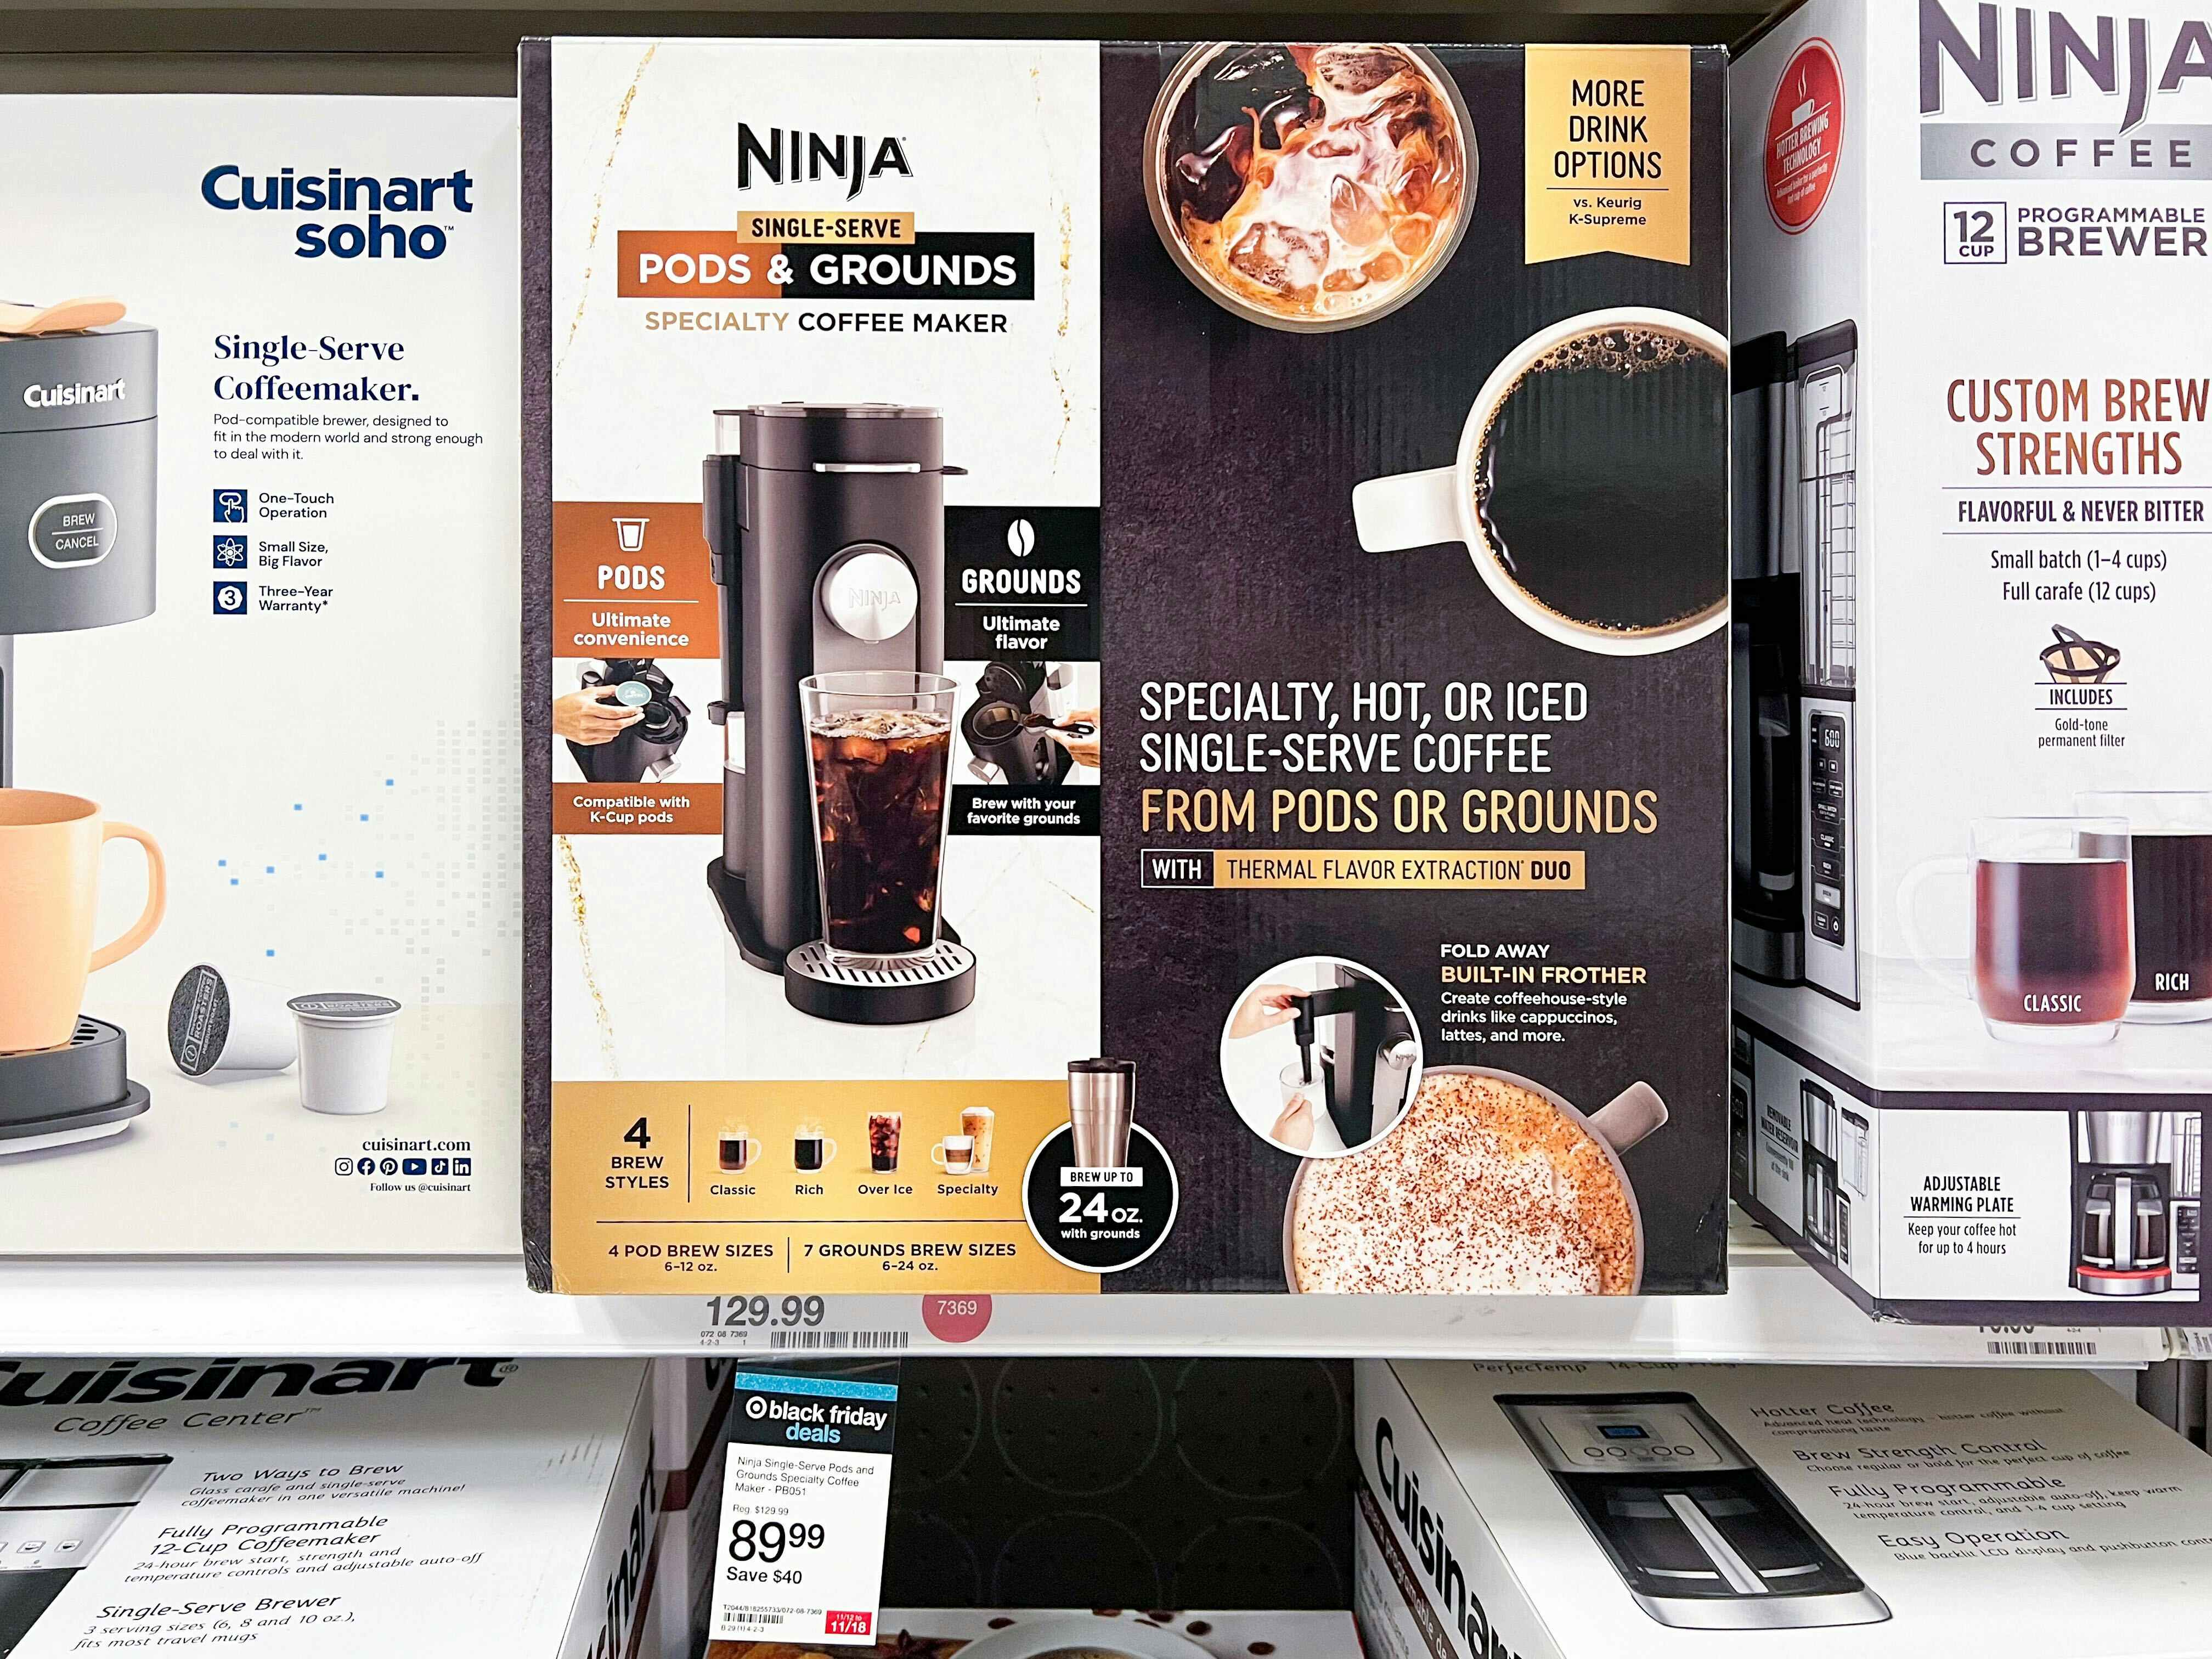 13 Ways to Get the Best Price on a Keurig Coffee Maker - The Krazy Coupon  Lady